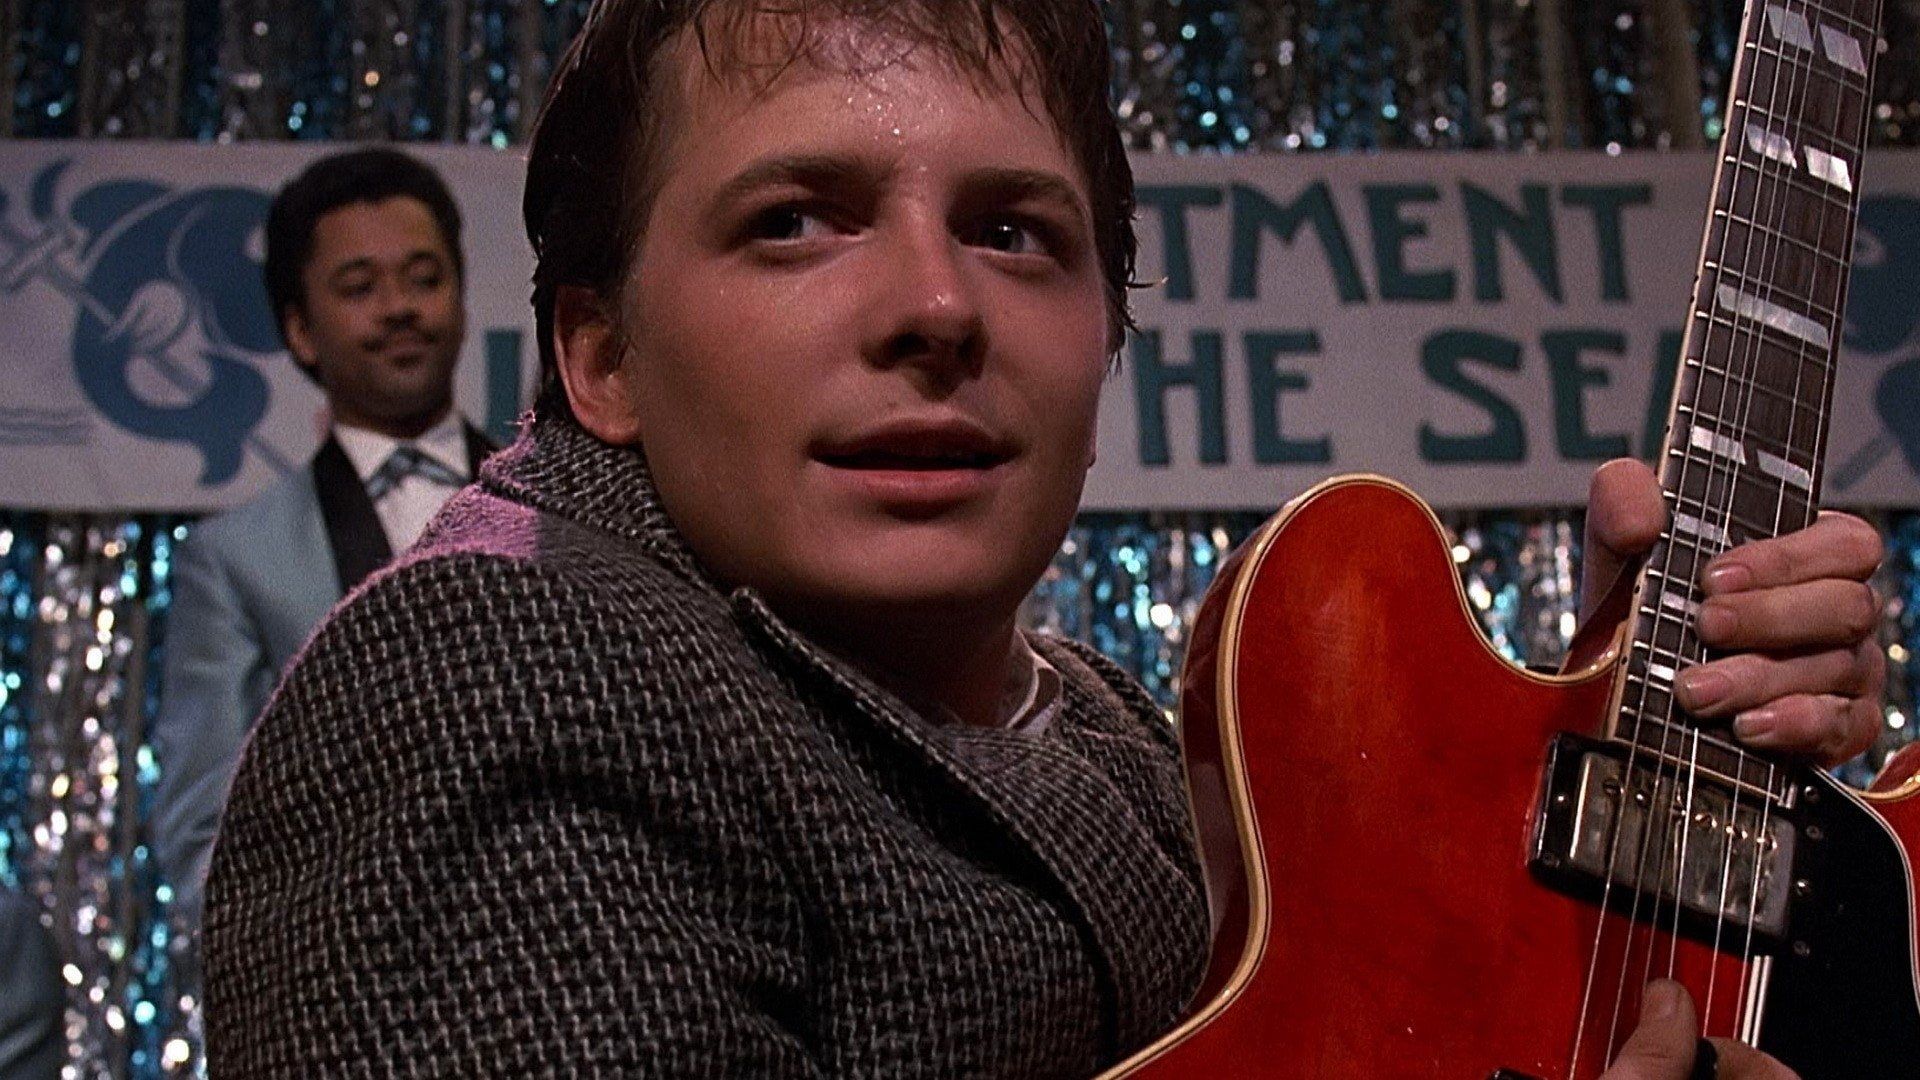 Back To The Future Marty McFly Michael J. Fox P #wallpaper #hdwallpaper #desktop. Back to the future, Best films to watch, Michael j